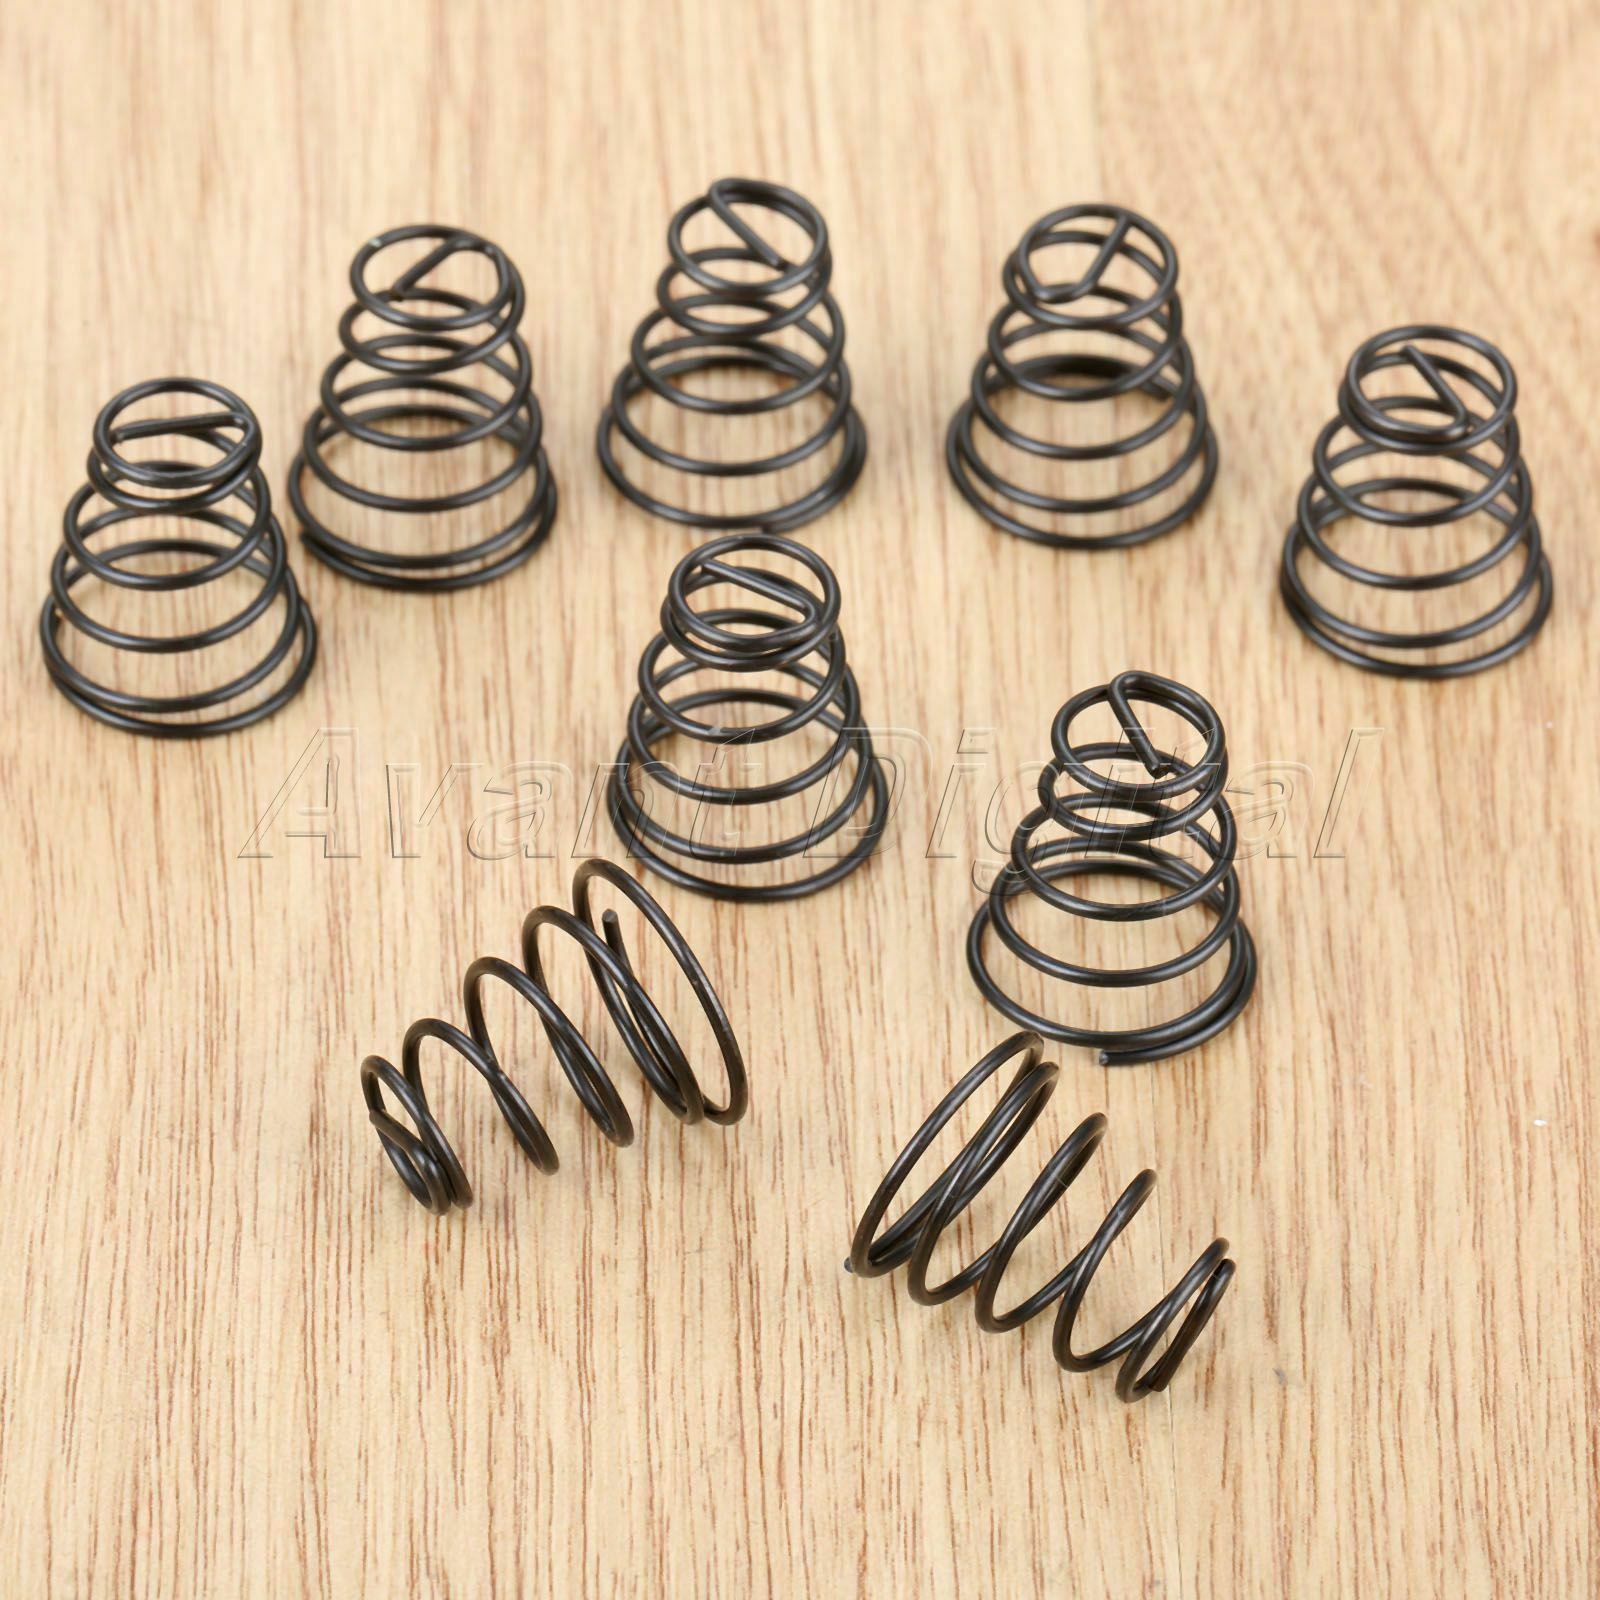 20Pcs Iron Spring Turnbuckles Sewing Machine Spare Parts Thread Tension Springs